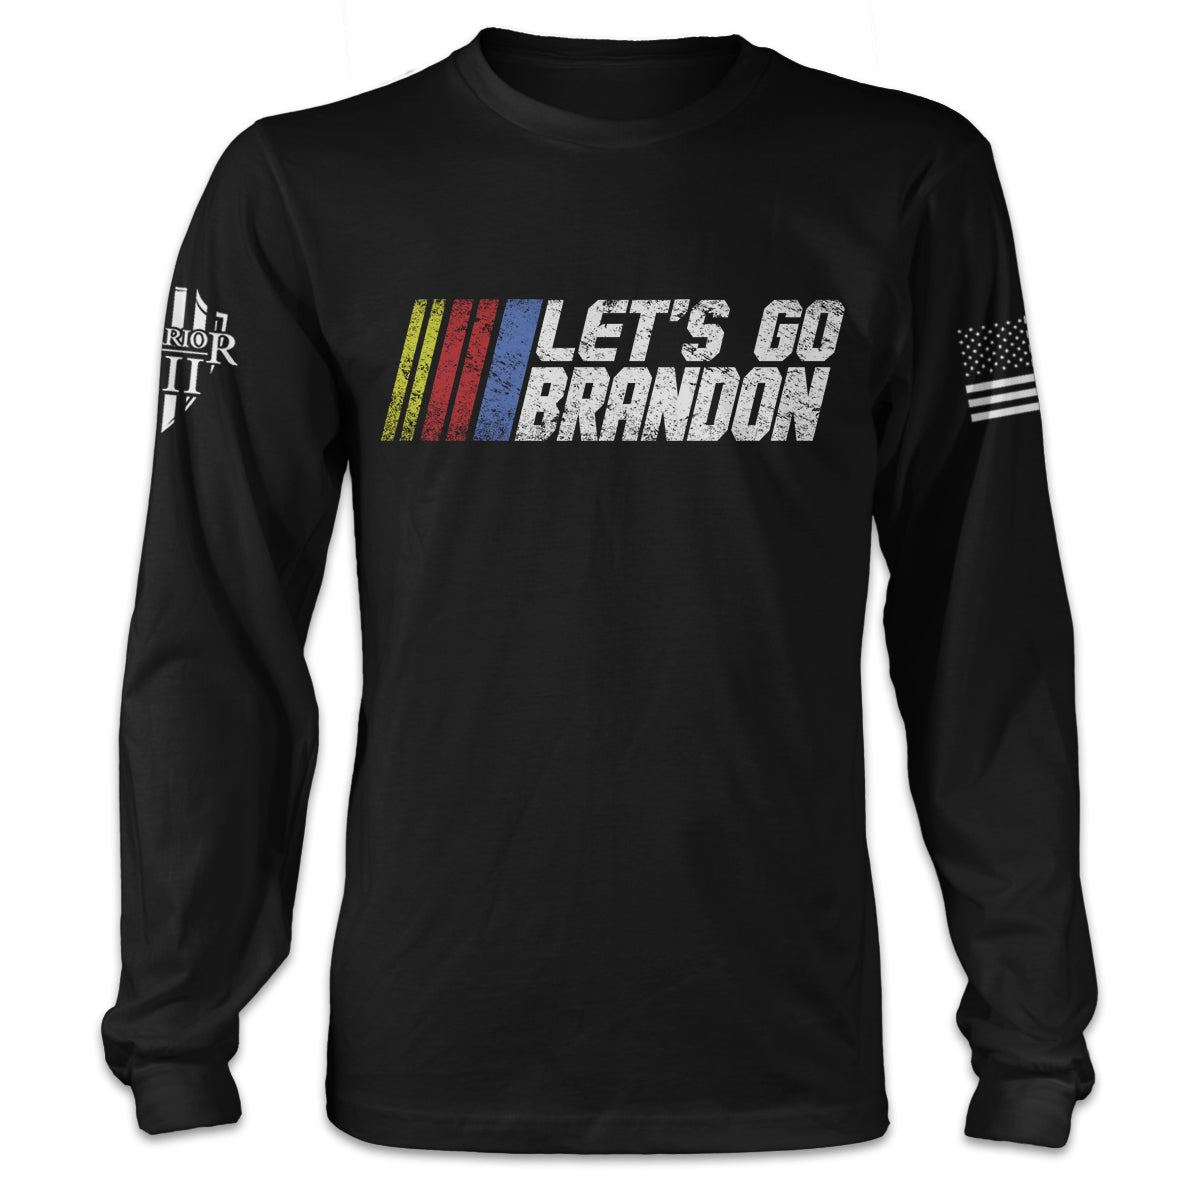 A black t-shirt with the words "Let's Go Brandon" printed on the front of the shirt.